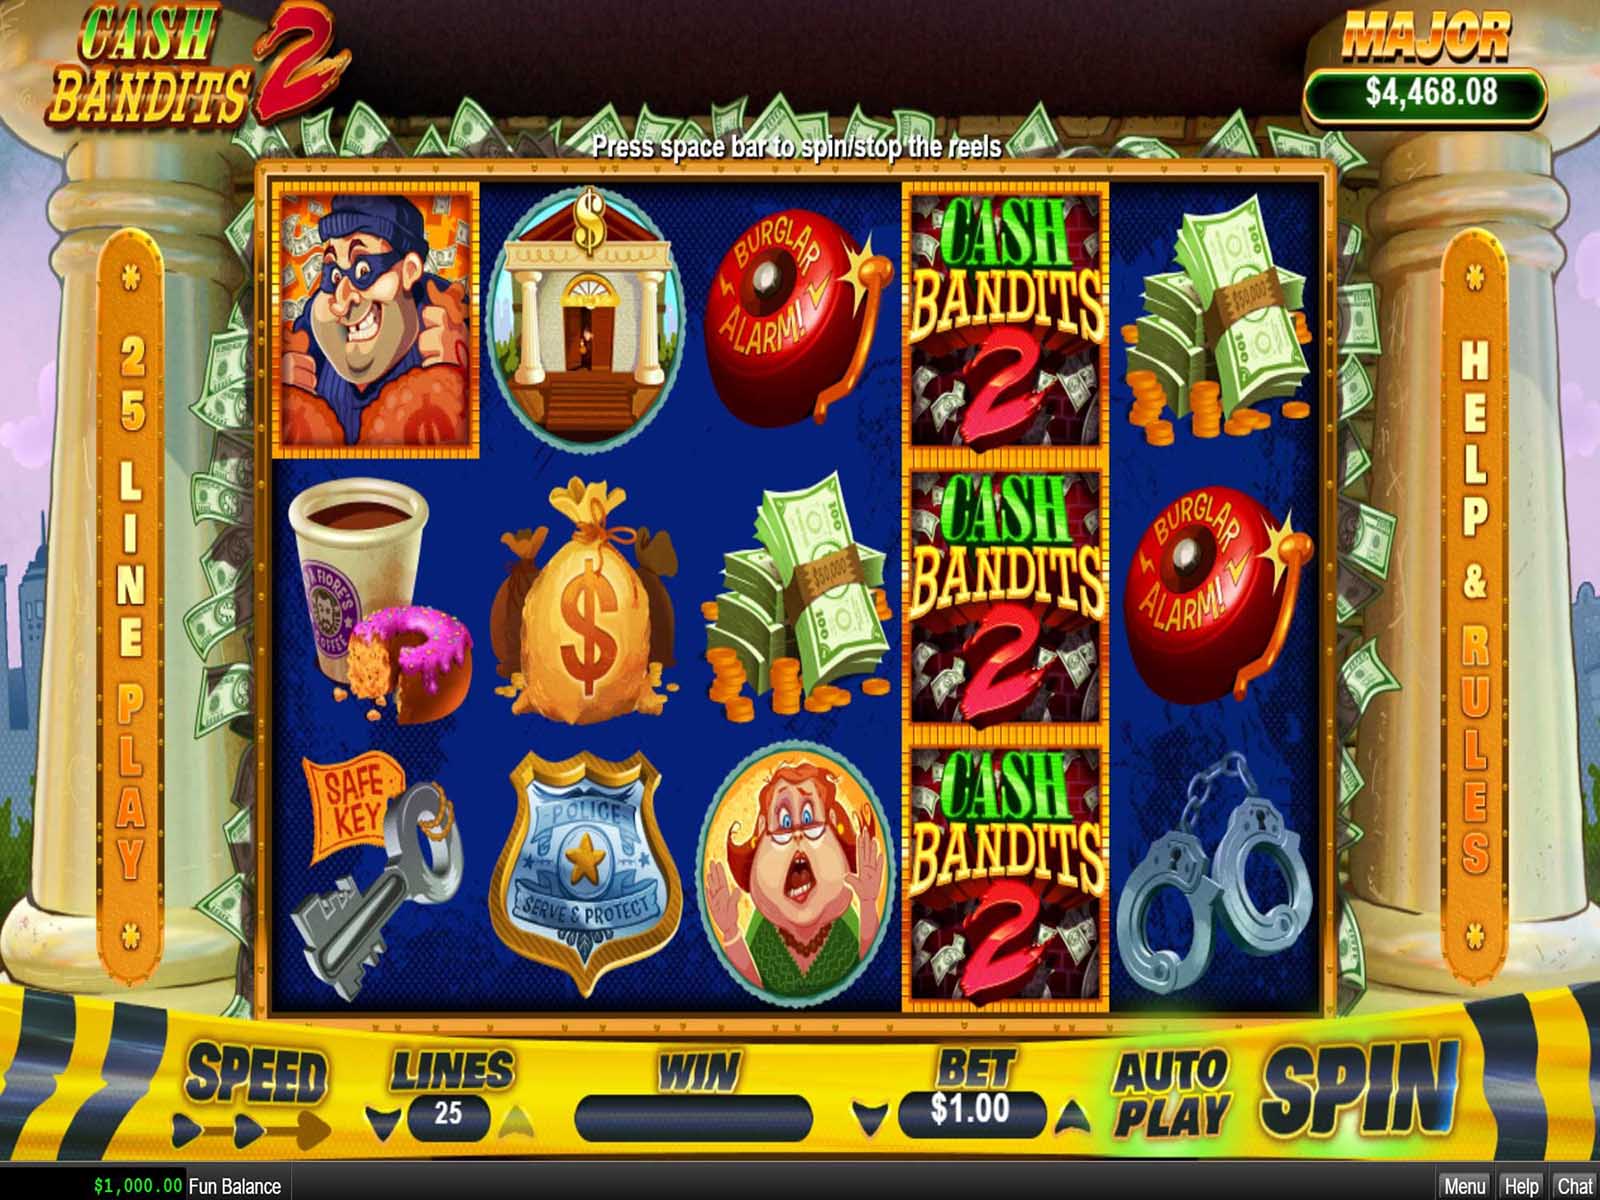 Play free games win real cash